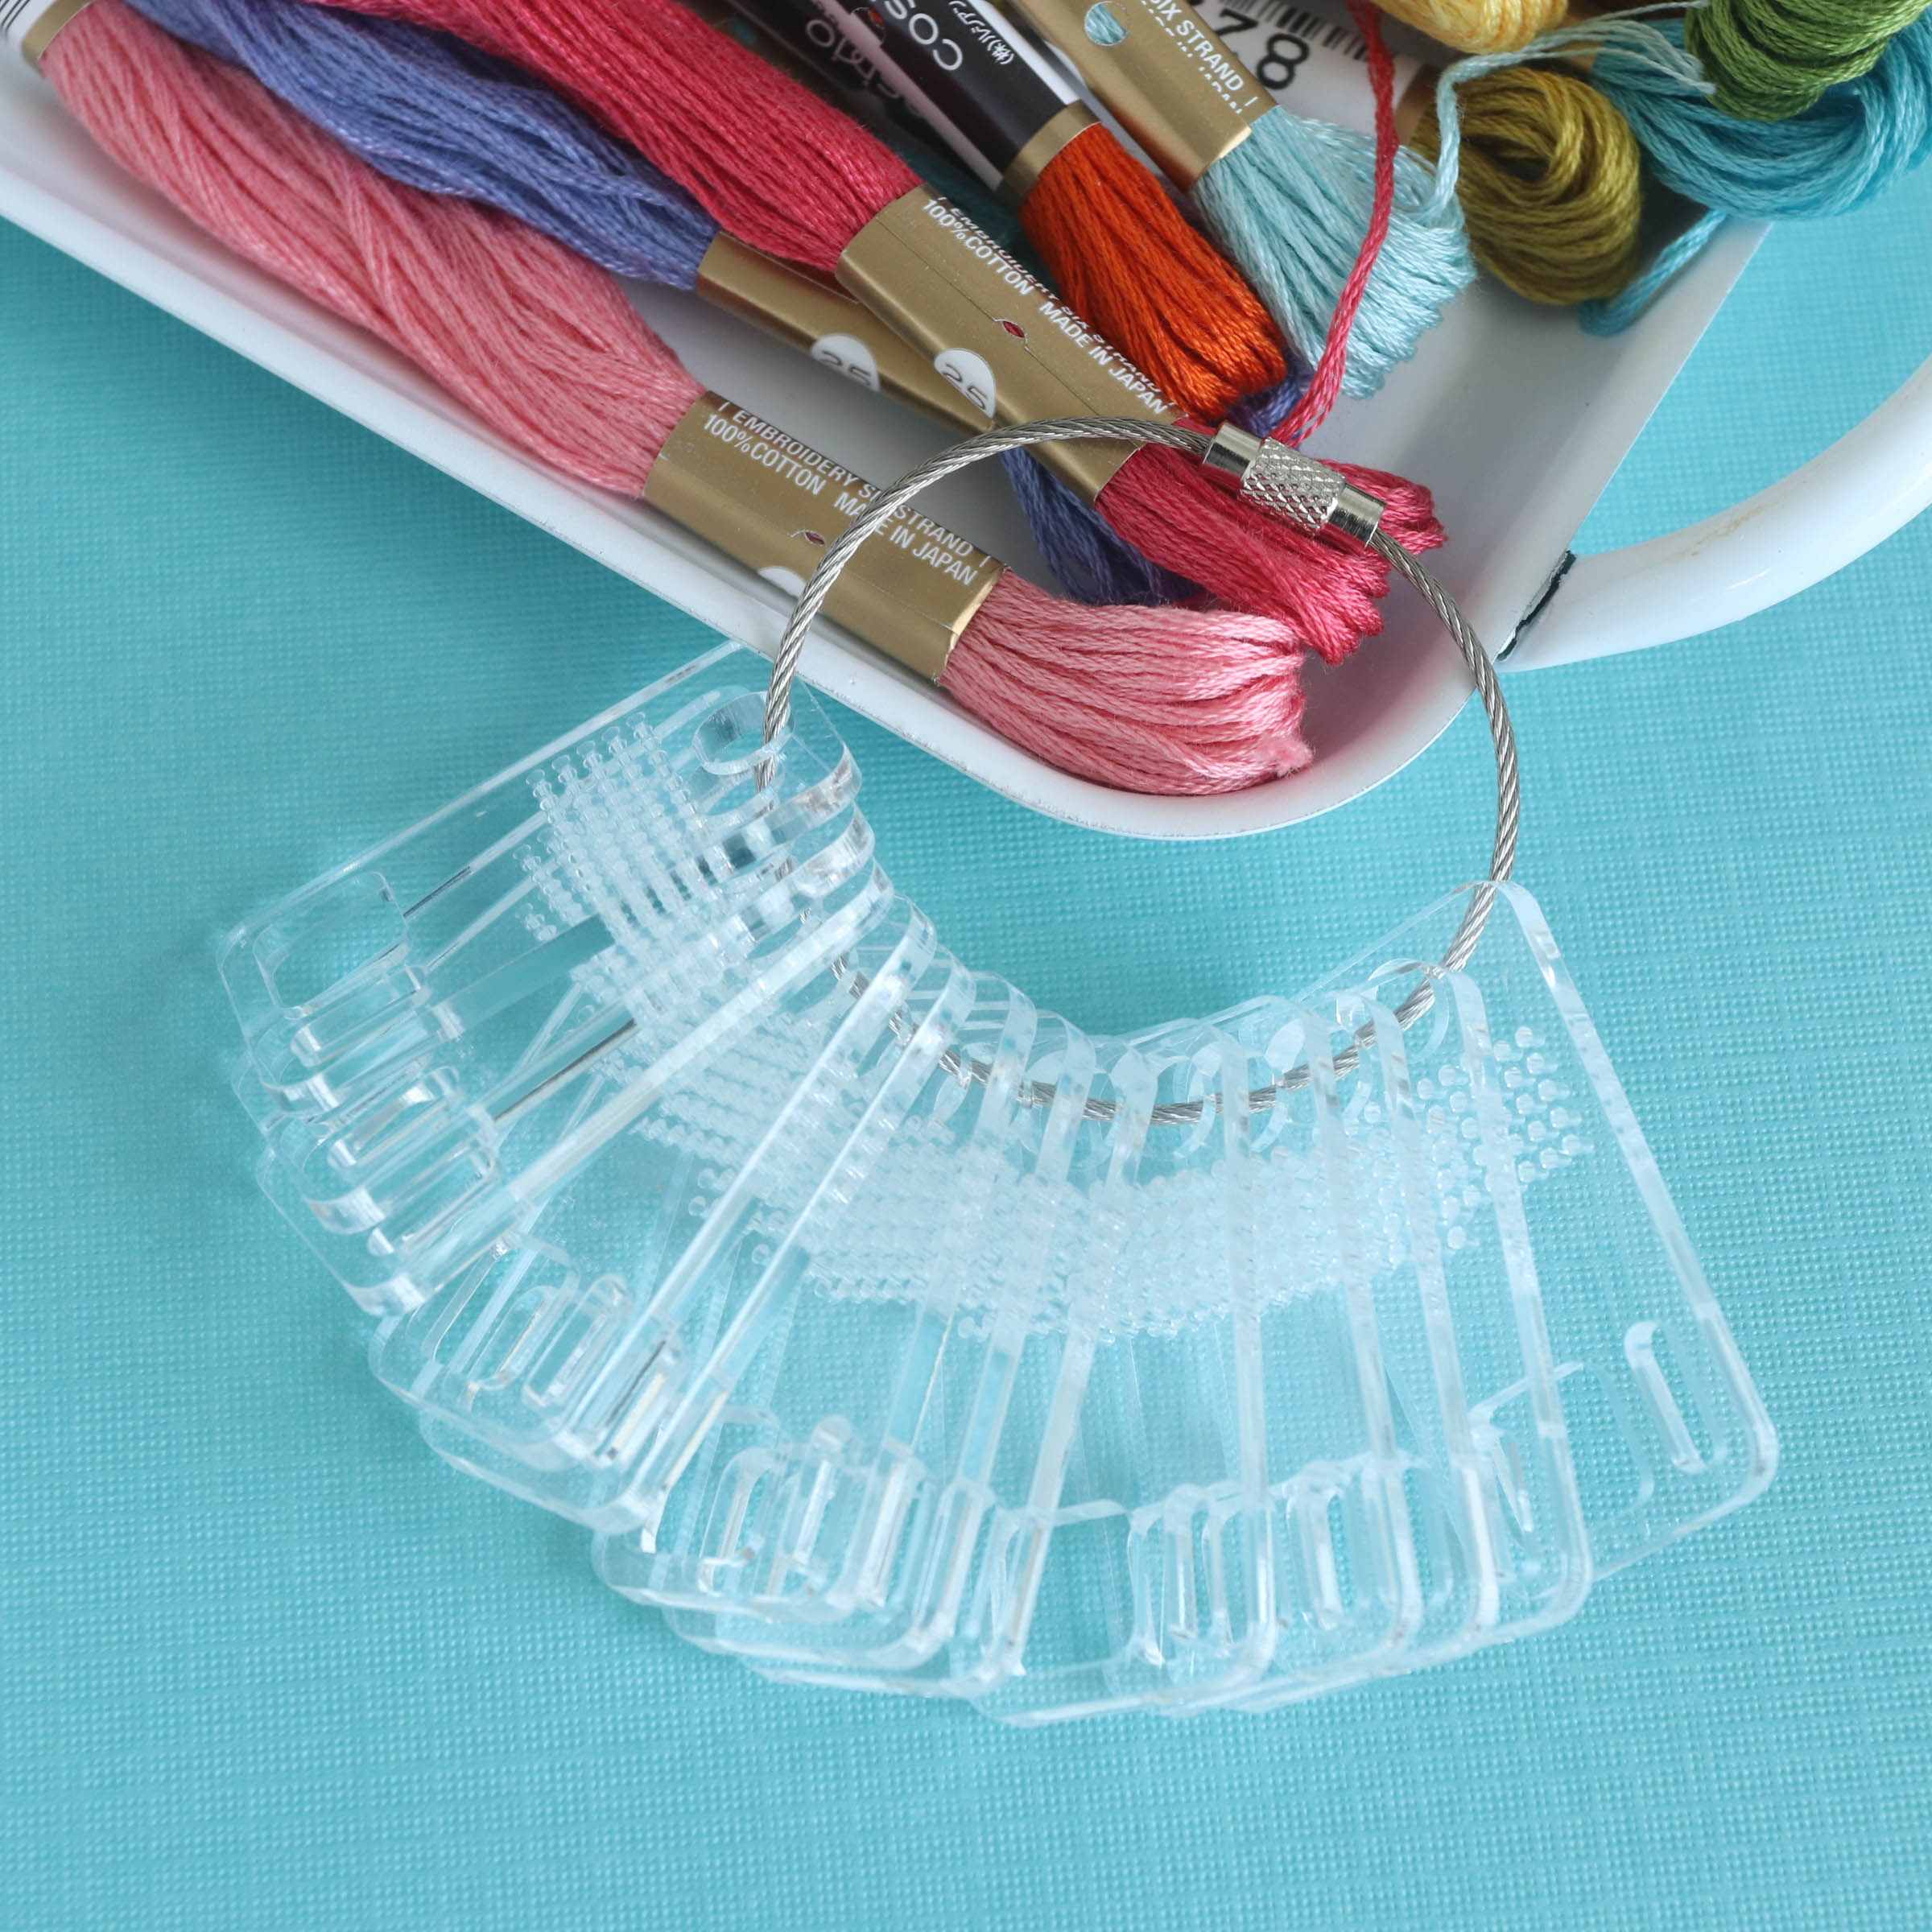 Clear Acrylic Thread Drops, Floss Drops, Floss Chips for Embroidery Floss  Organization (20 Pieces)